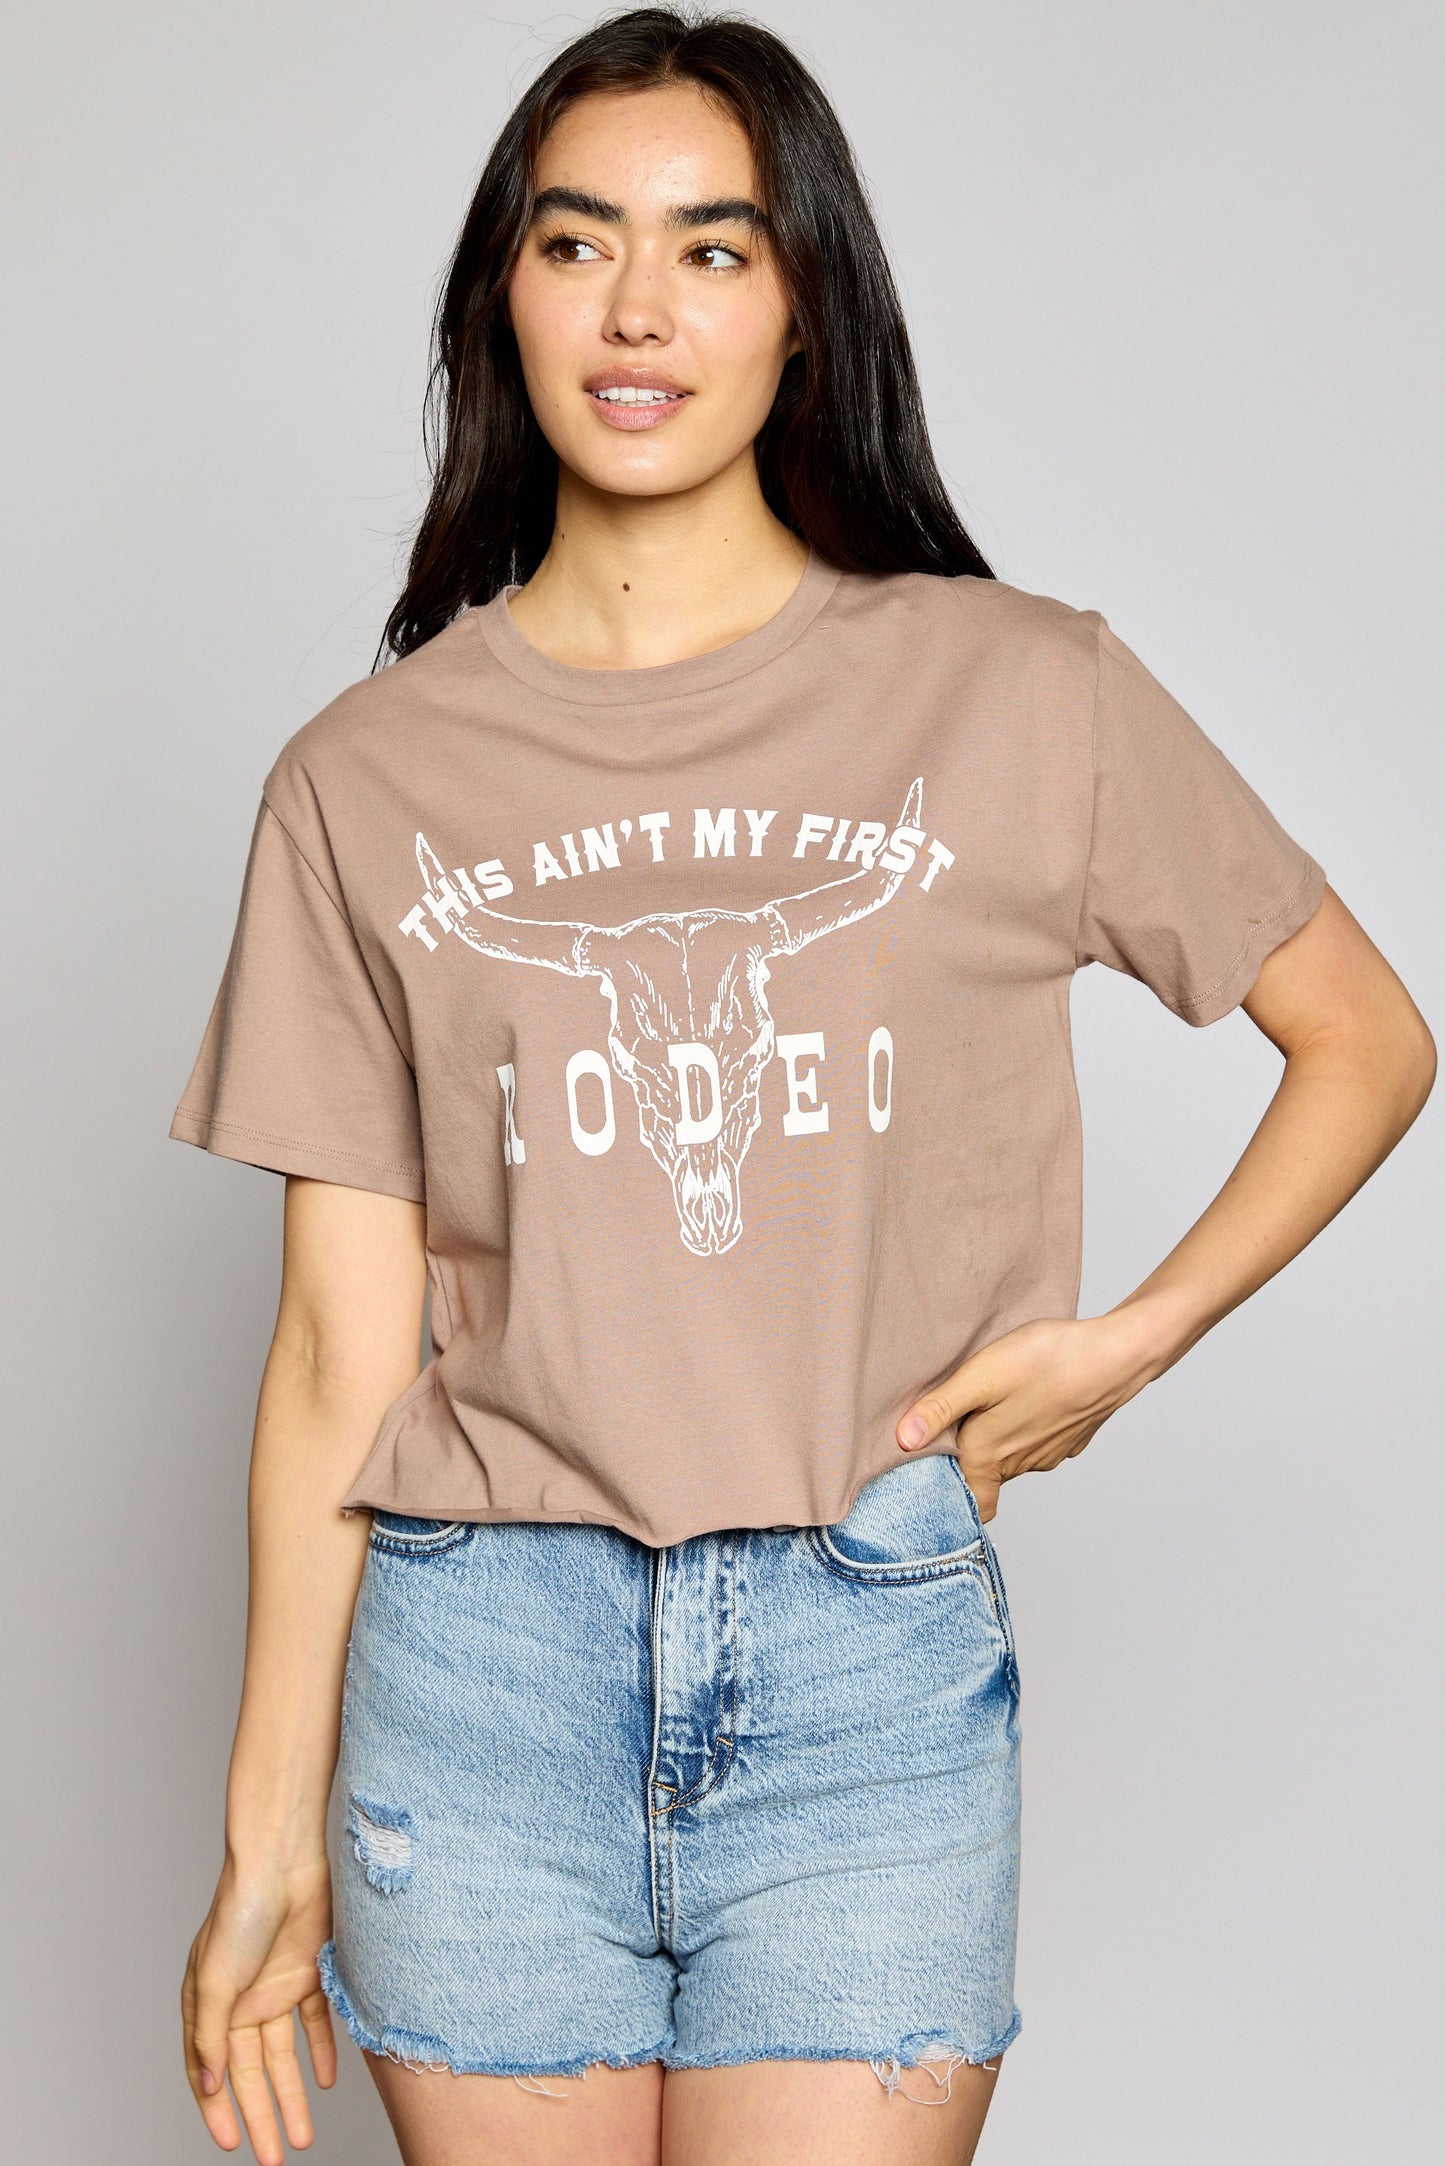 Ain't My First Rodeo Tee